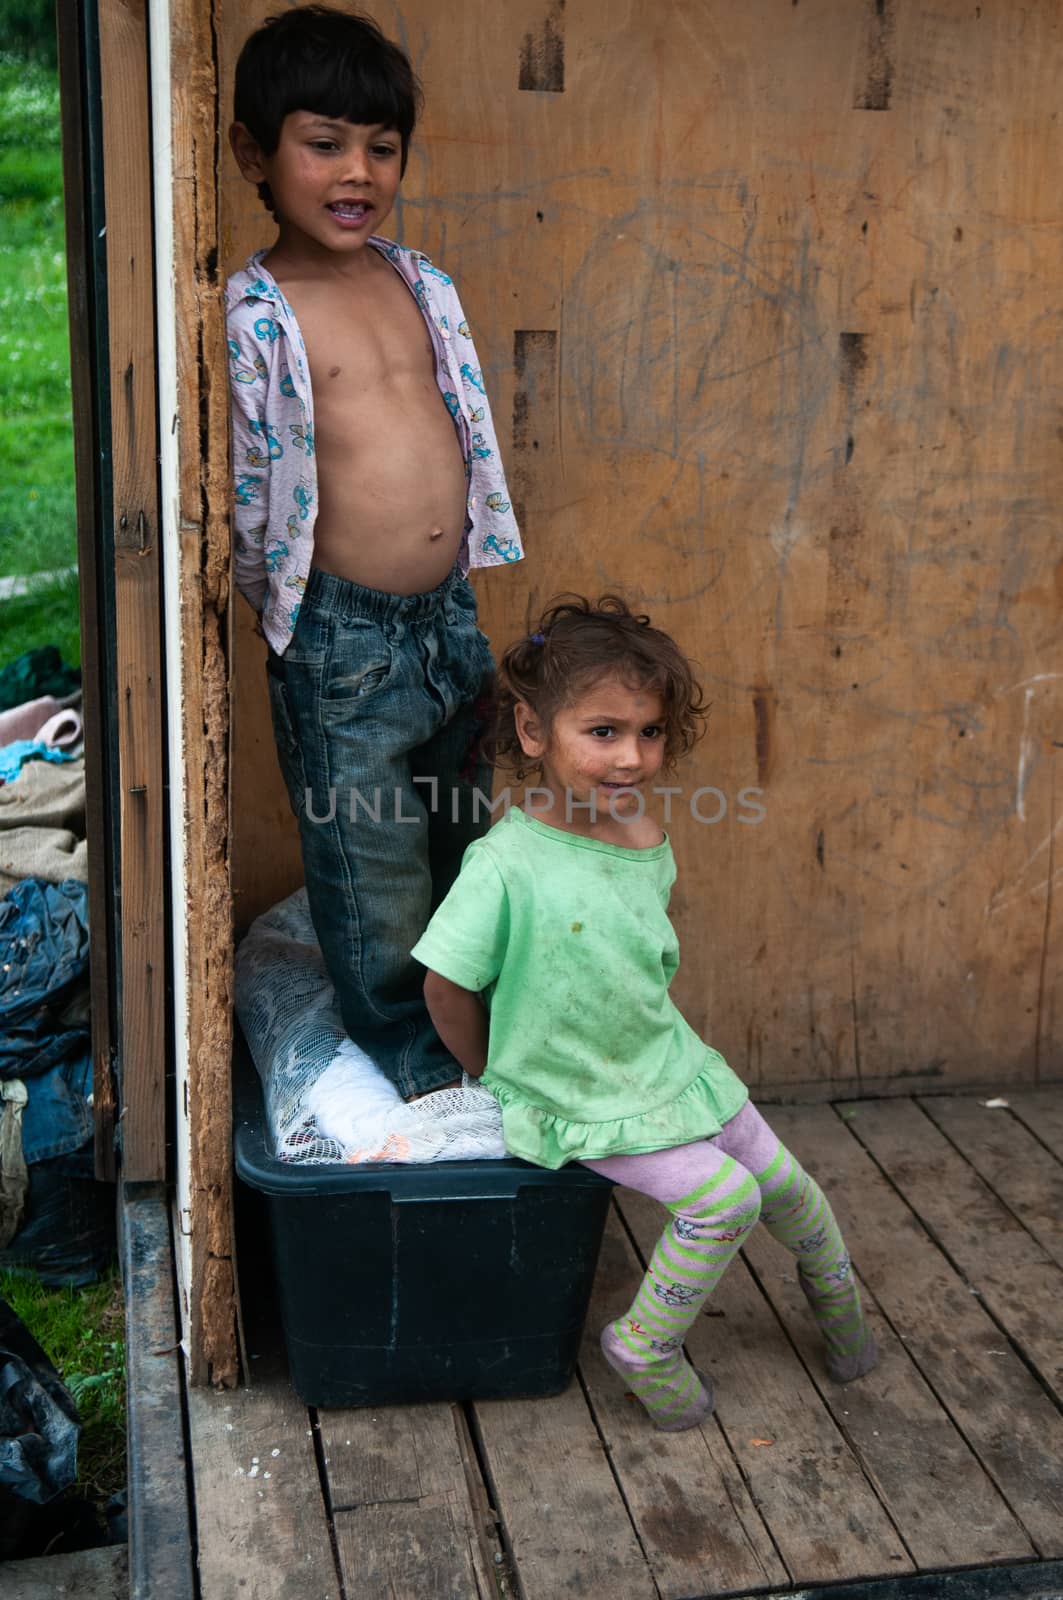 5/16/2018. Lomnicka, Slovakia. Roma community in the heart of Slovakia, living in horrible conditions. Portrait of child.